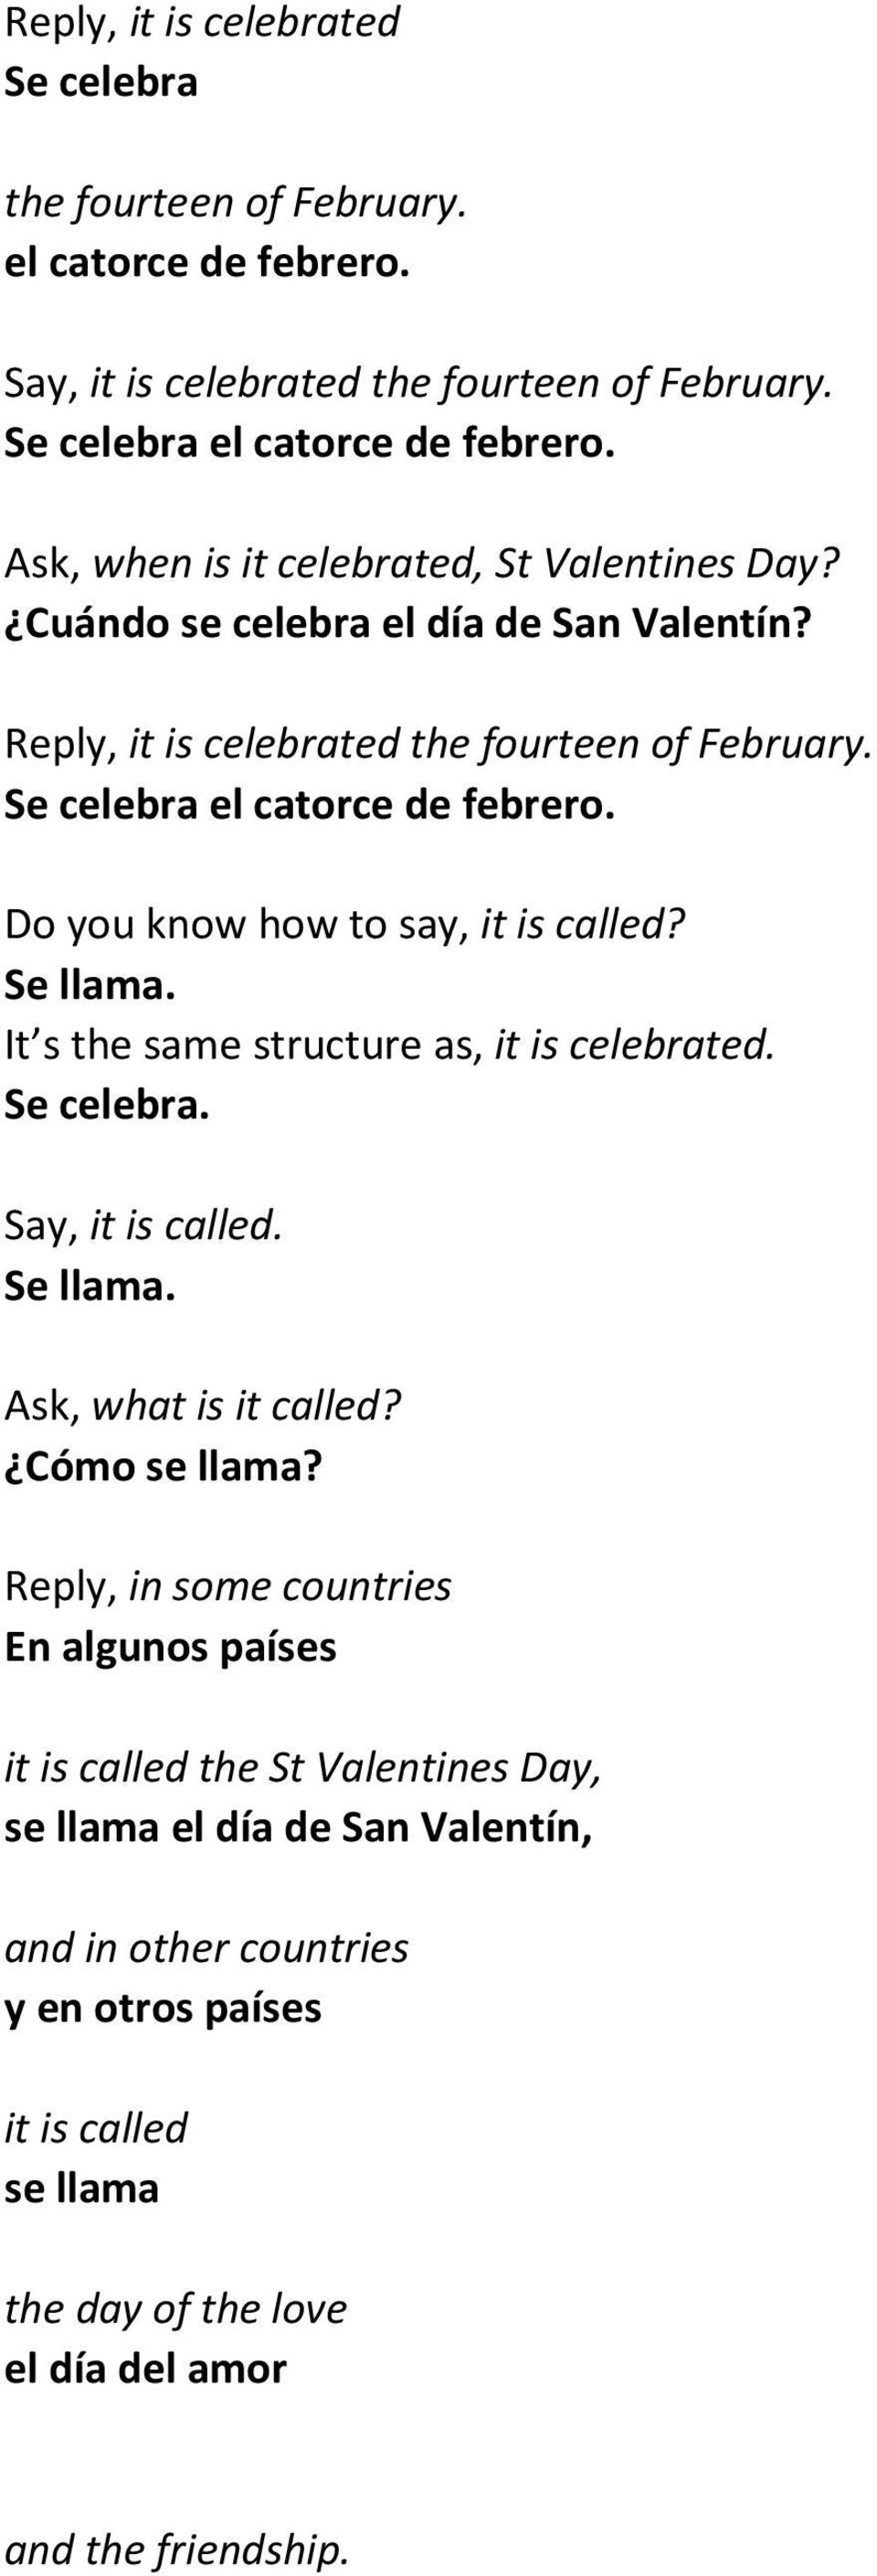 Do you know how to say, it is called? Se llama. It s the same structure as, it is celebrated. Se celebra. Say, it is called. Se llama. Ask, what is it called? Cómo se llama?